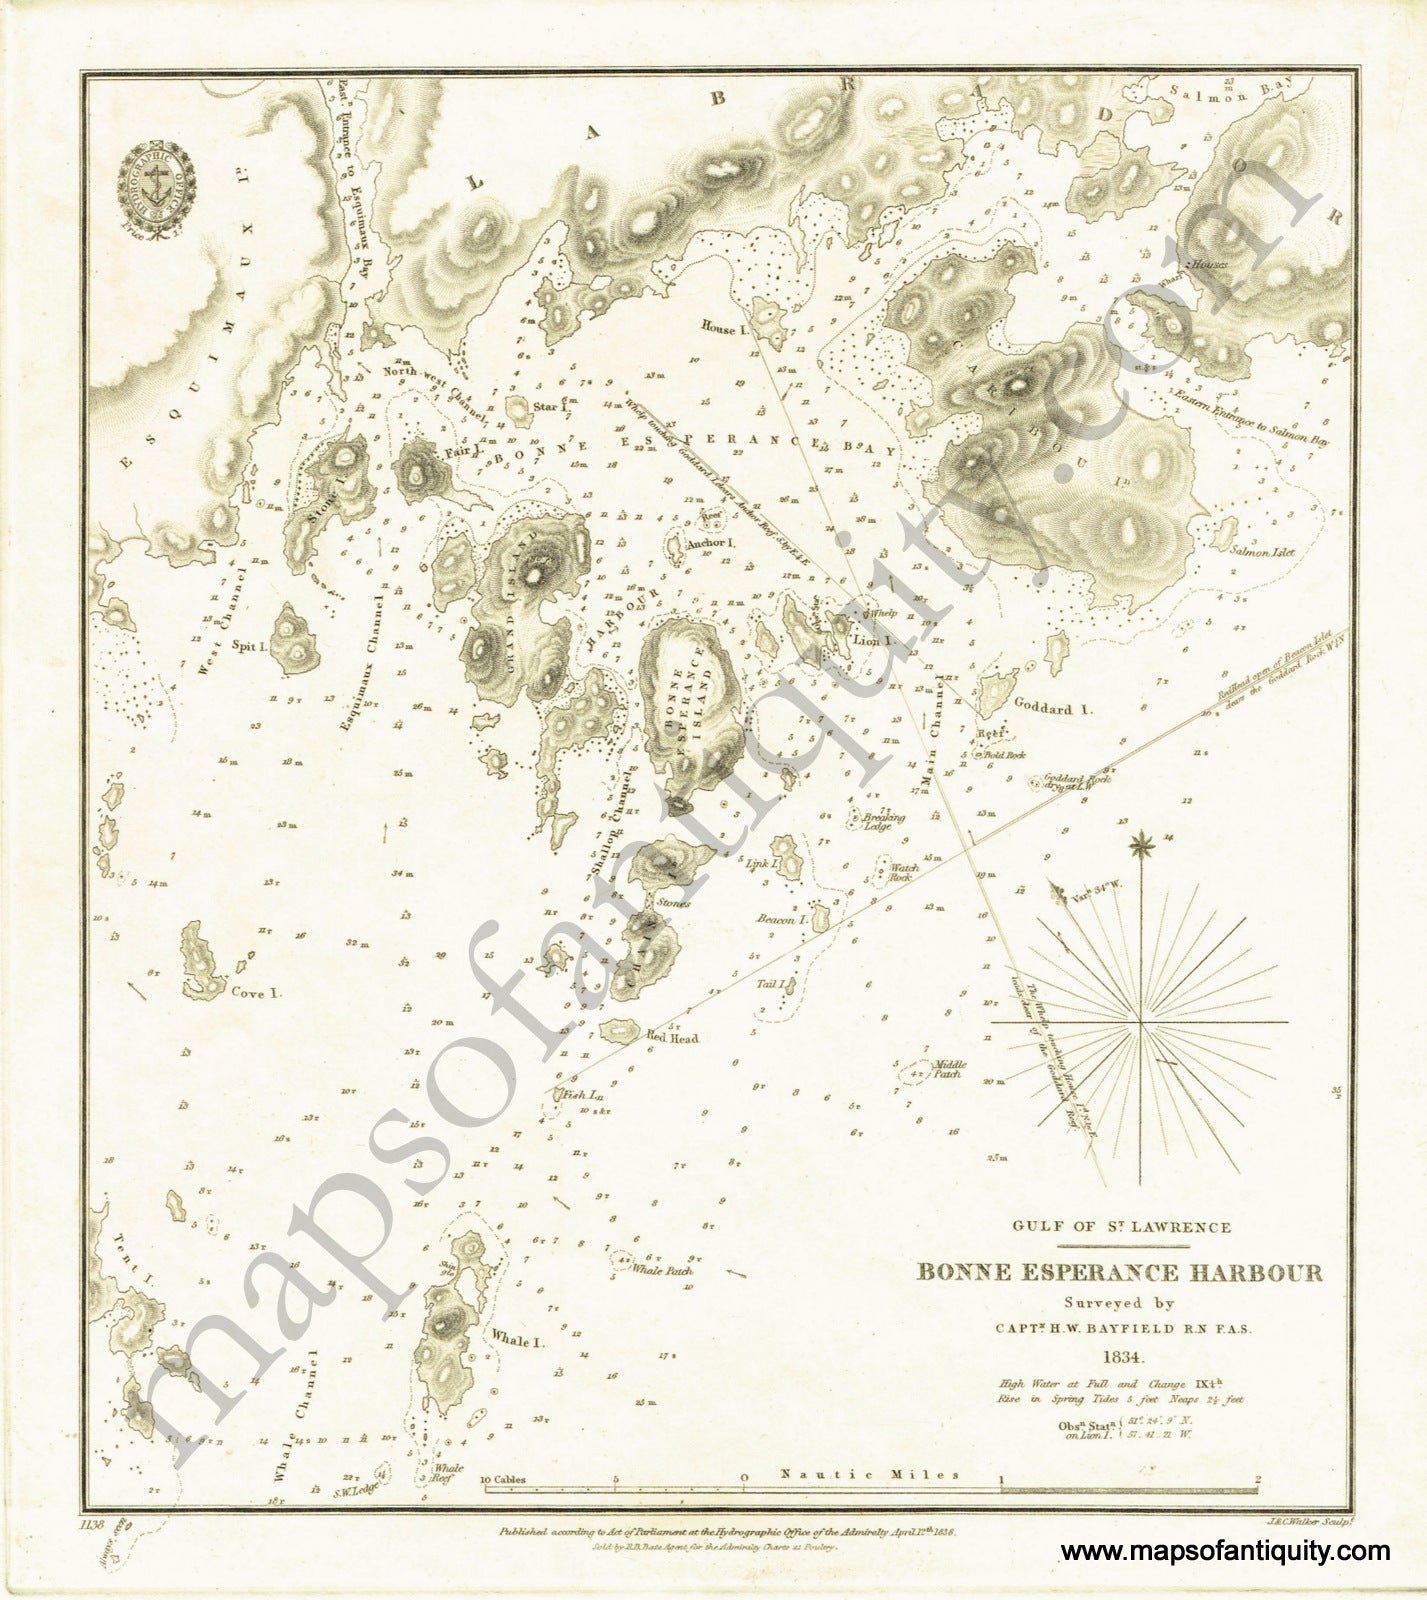 Antique-Black-and-White-Nautical-Chart-Gulf-of-St.-Lawrence:-Bonne-Esperance-Harbour-North-America-Nautical-Charts-Canada-1838-British-Admiralty-Maps-Of-Antiquity